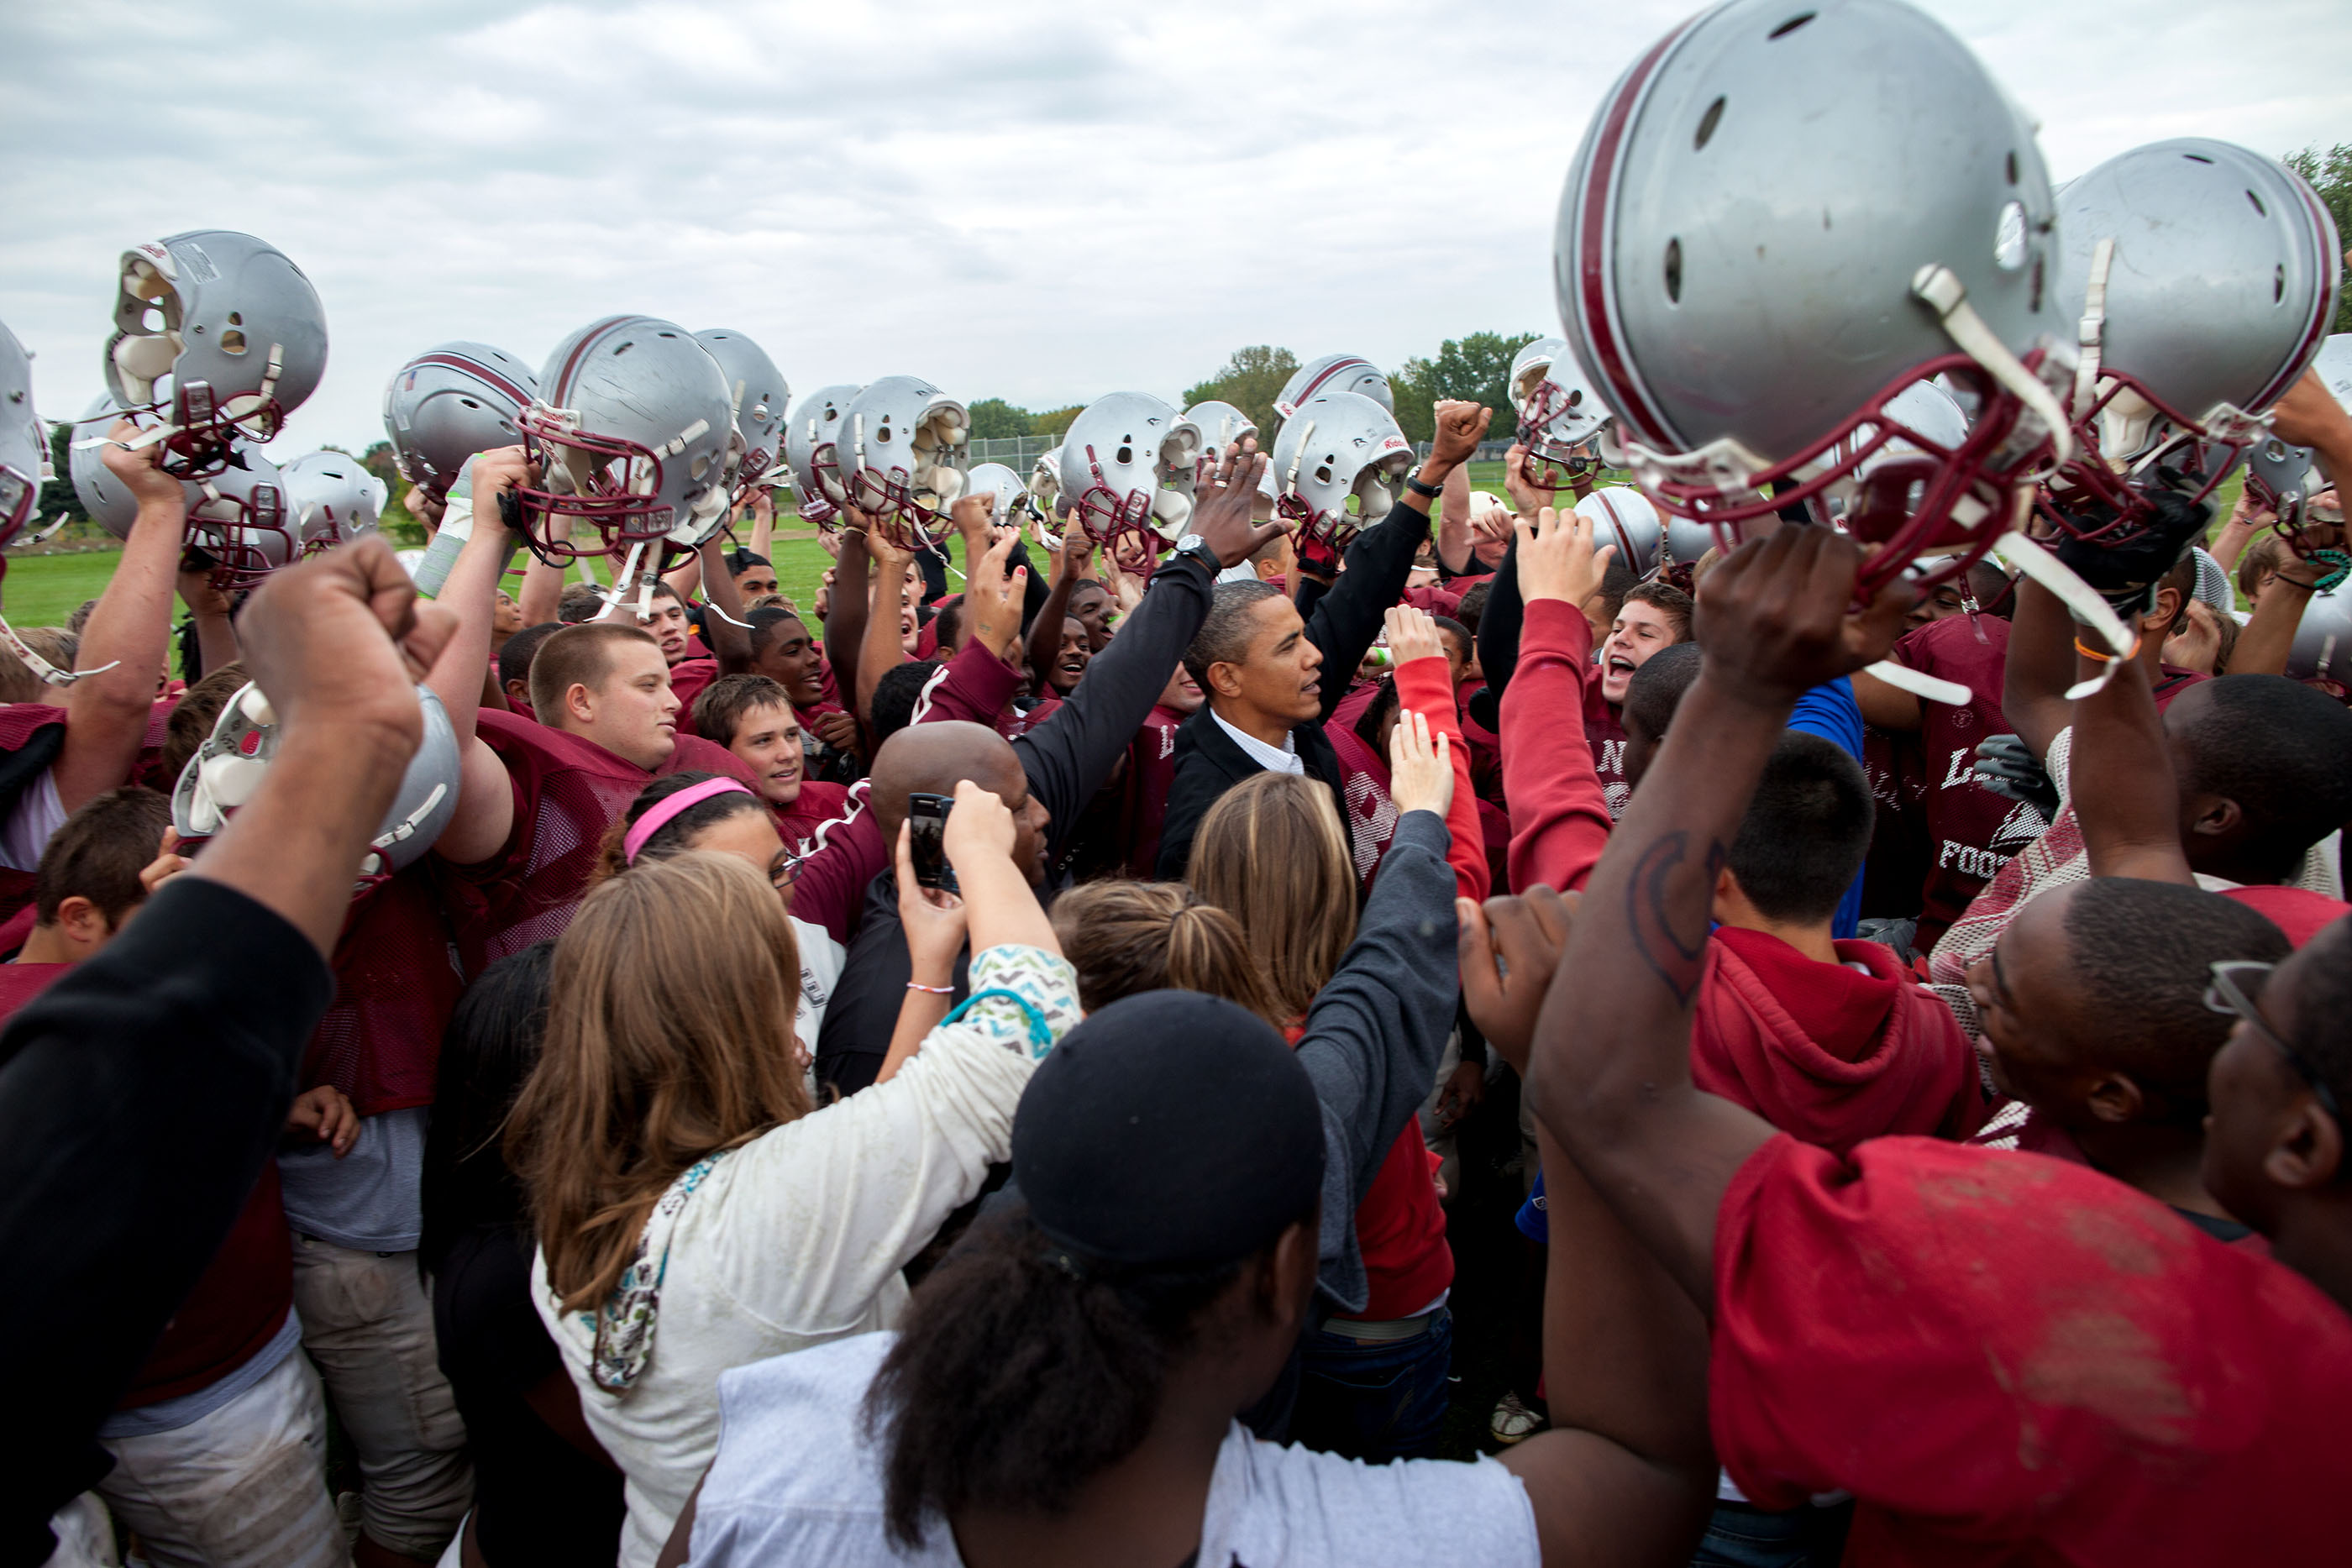 Wisconsin, Sept. 28, 2010. Cheering with the La Follette Lancers football team during their practice in Madison. (Official White House Photo by Pete Souza)